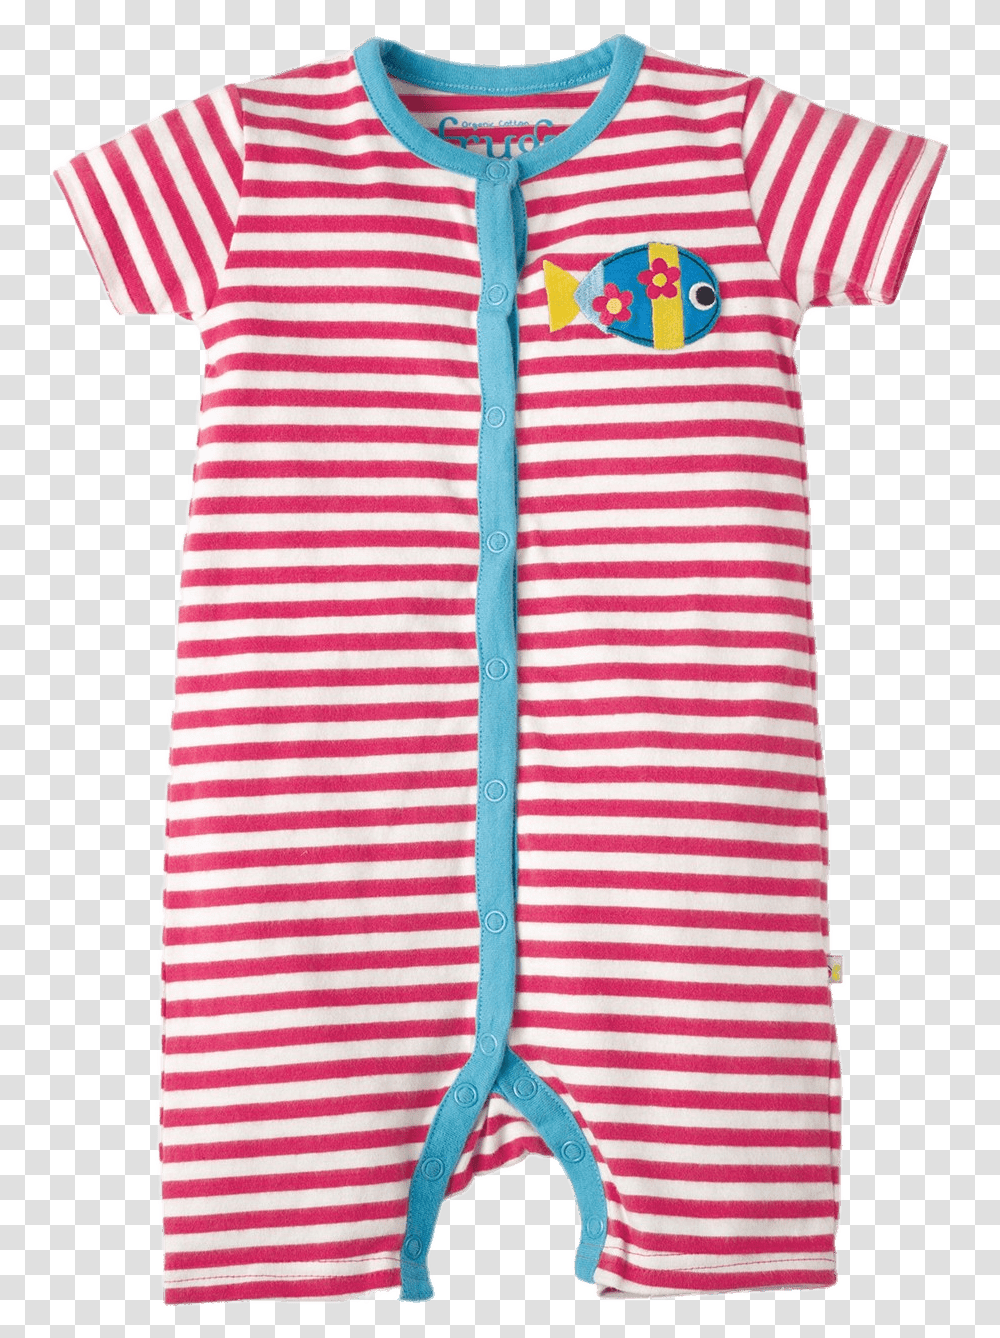 Red And White Striped Baby Romper Winnie The Pooh White And Yellow Striped Shirt, Apparel, Coat, Vest Transparent Png